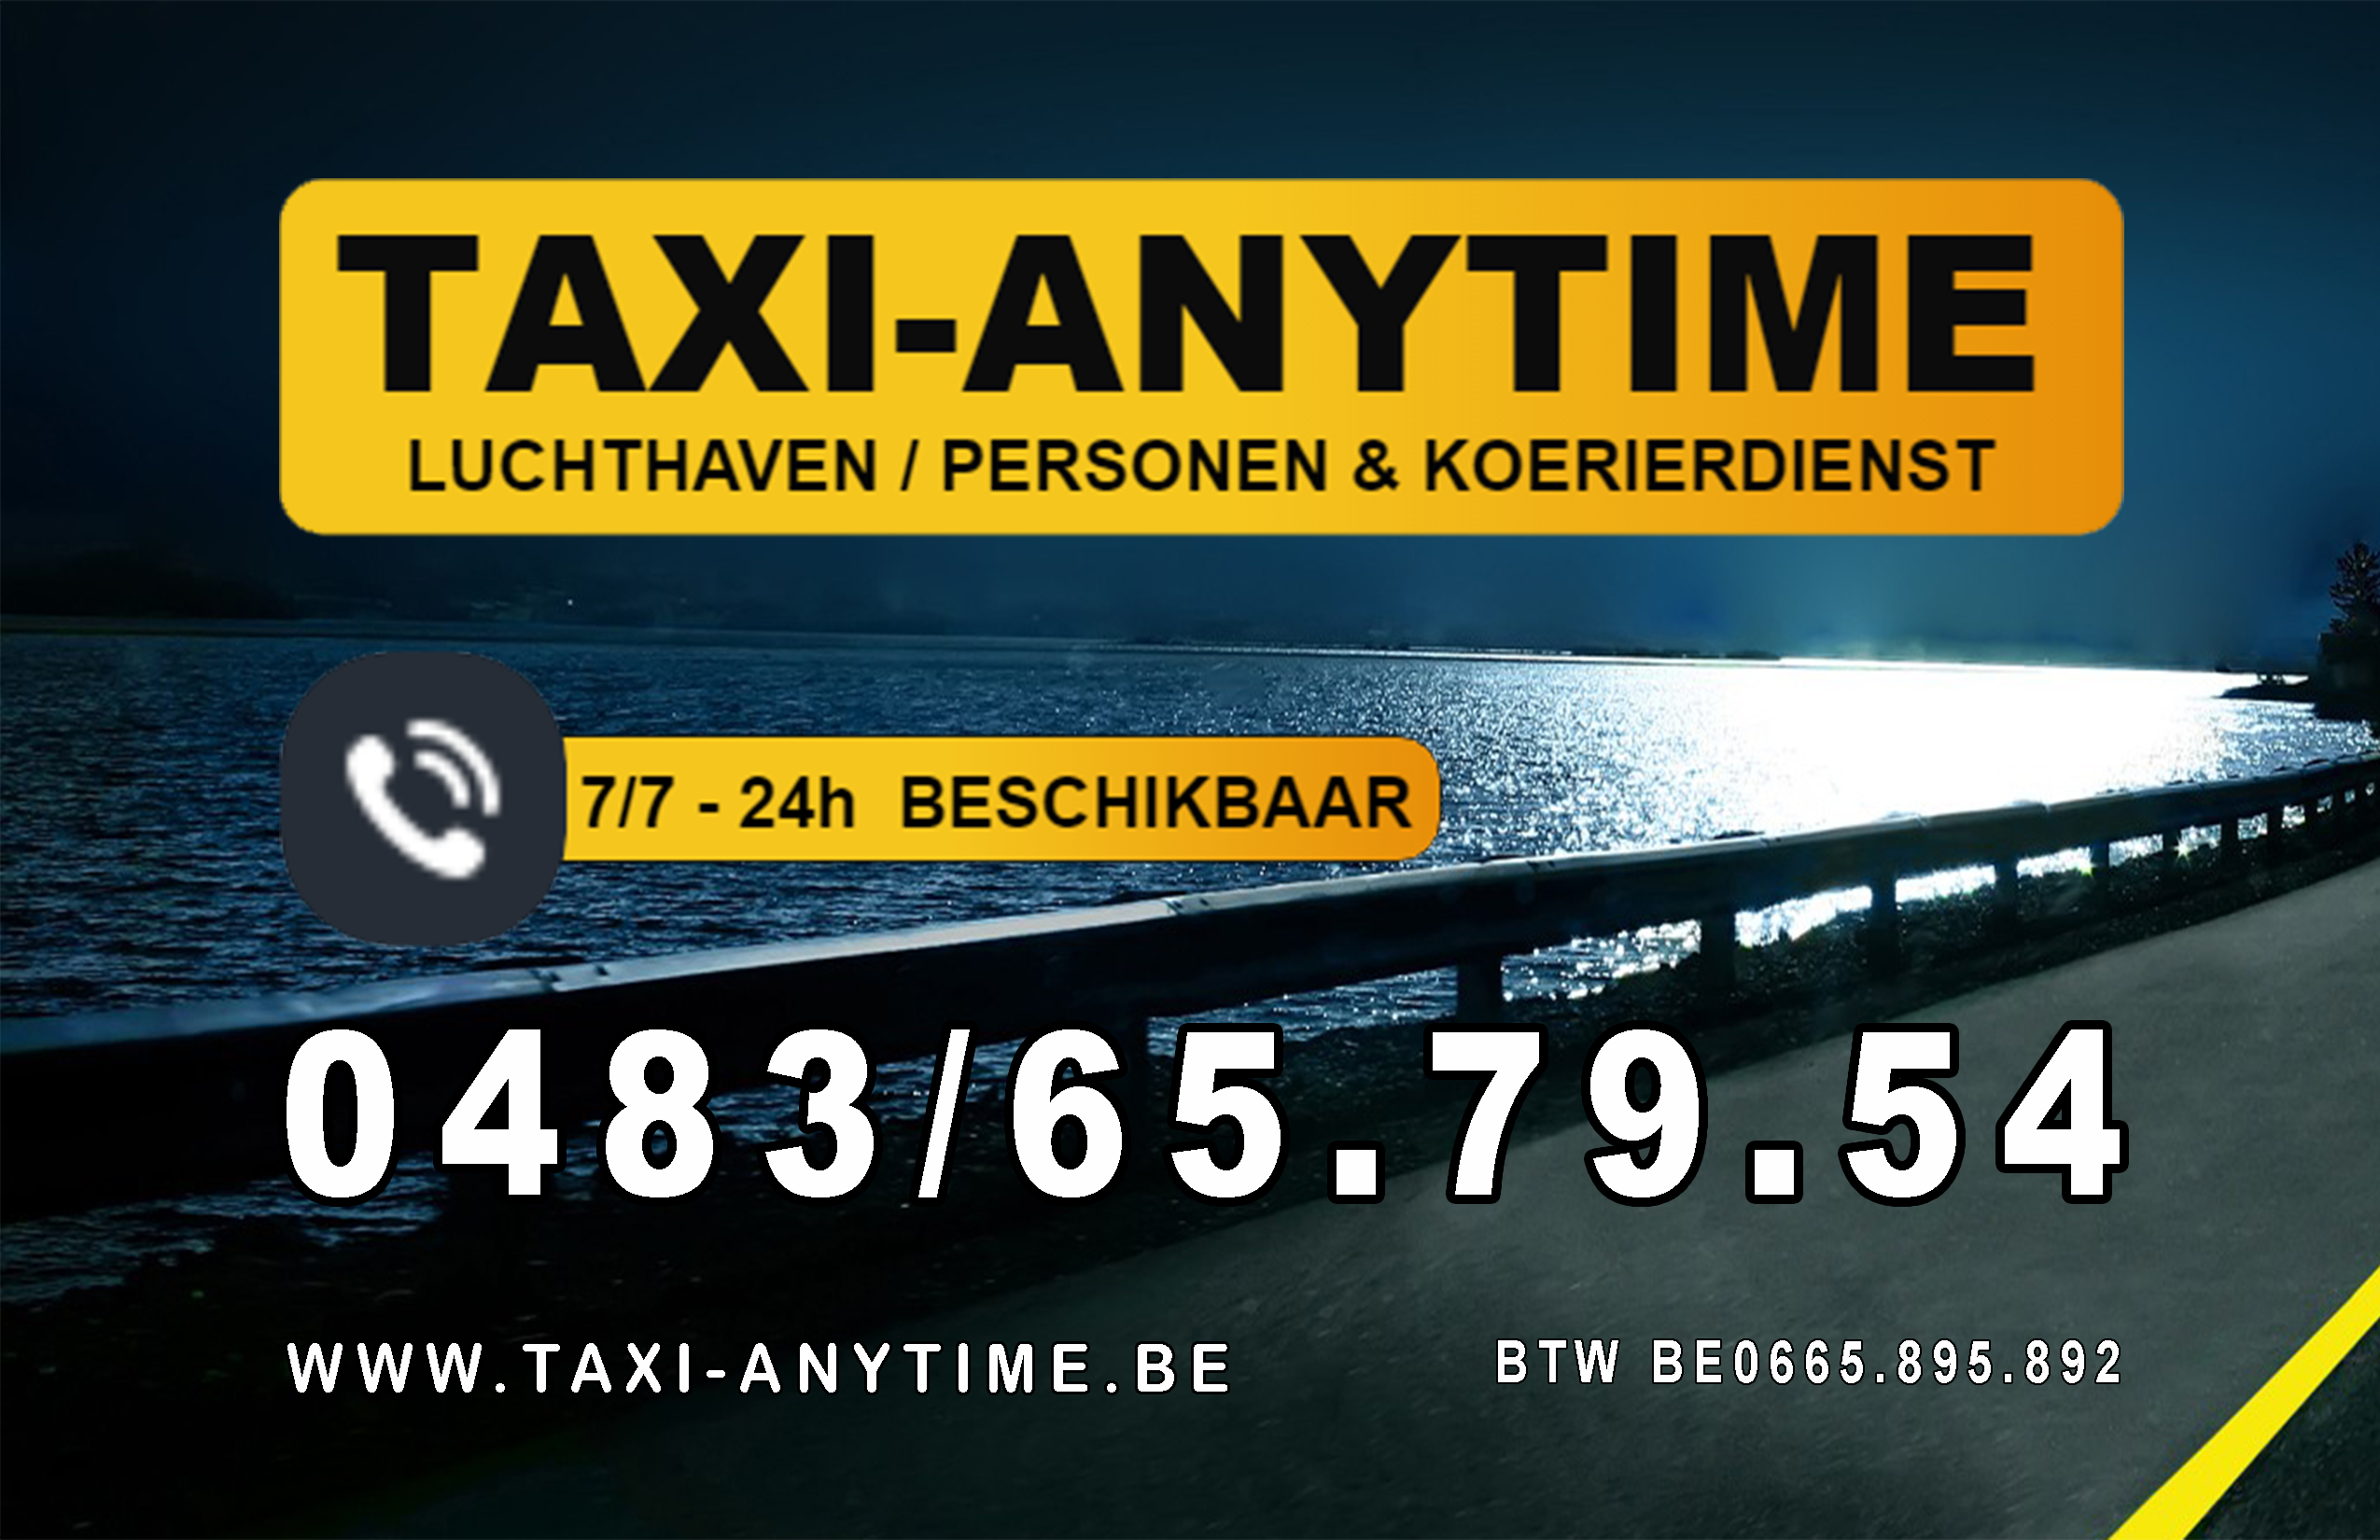 koeriers Turnhout anytime taxi